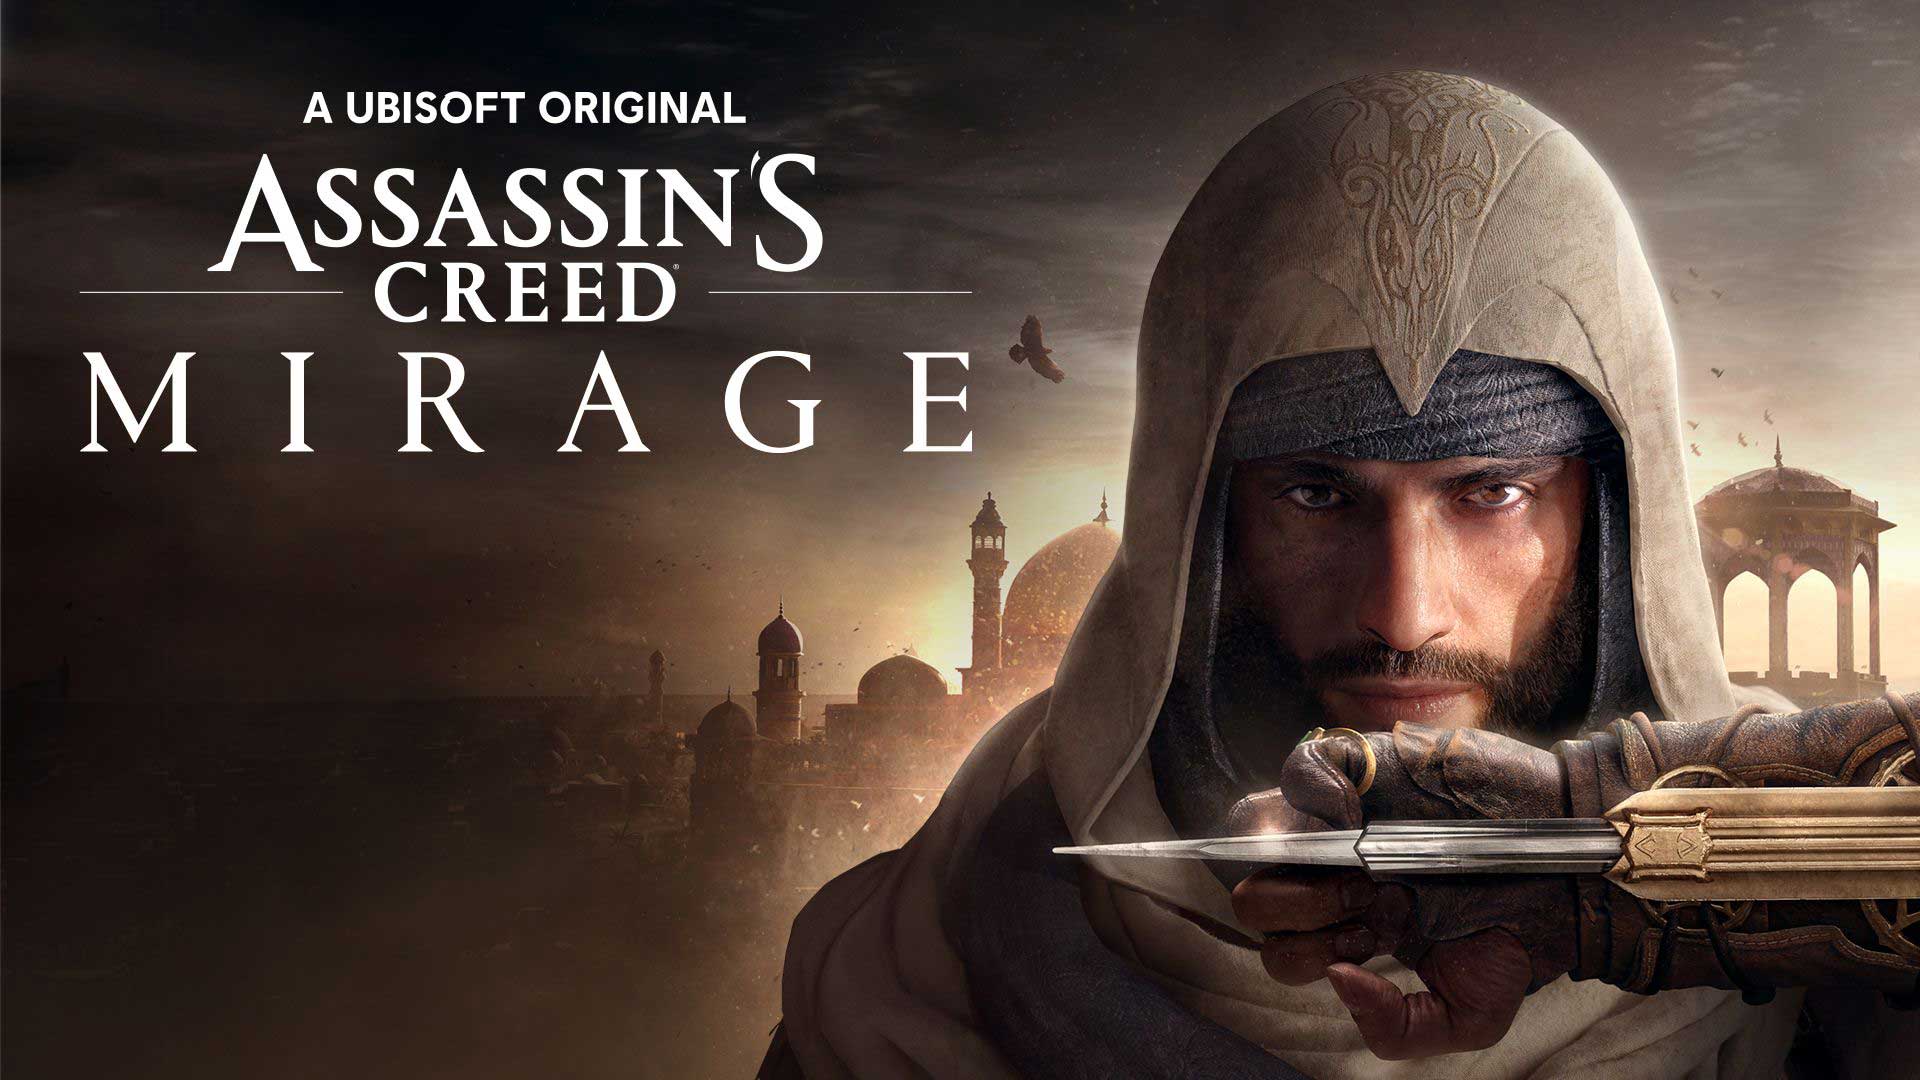 Assassin’s Creed Mirage, Road to Video Games, roadtovideogames.com